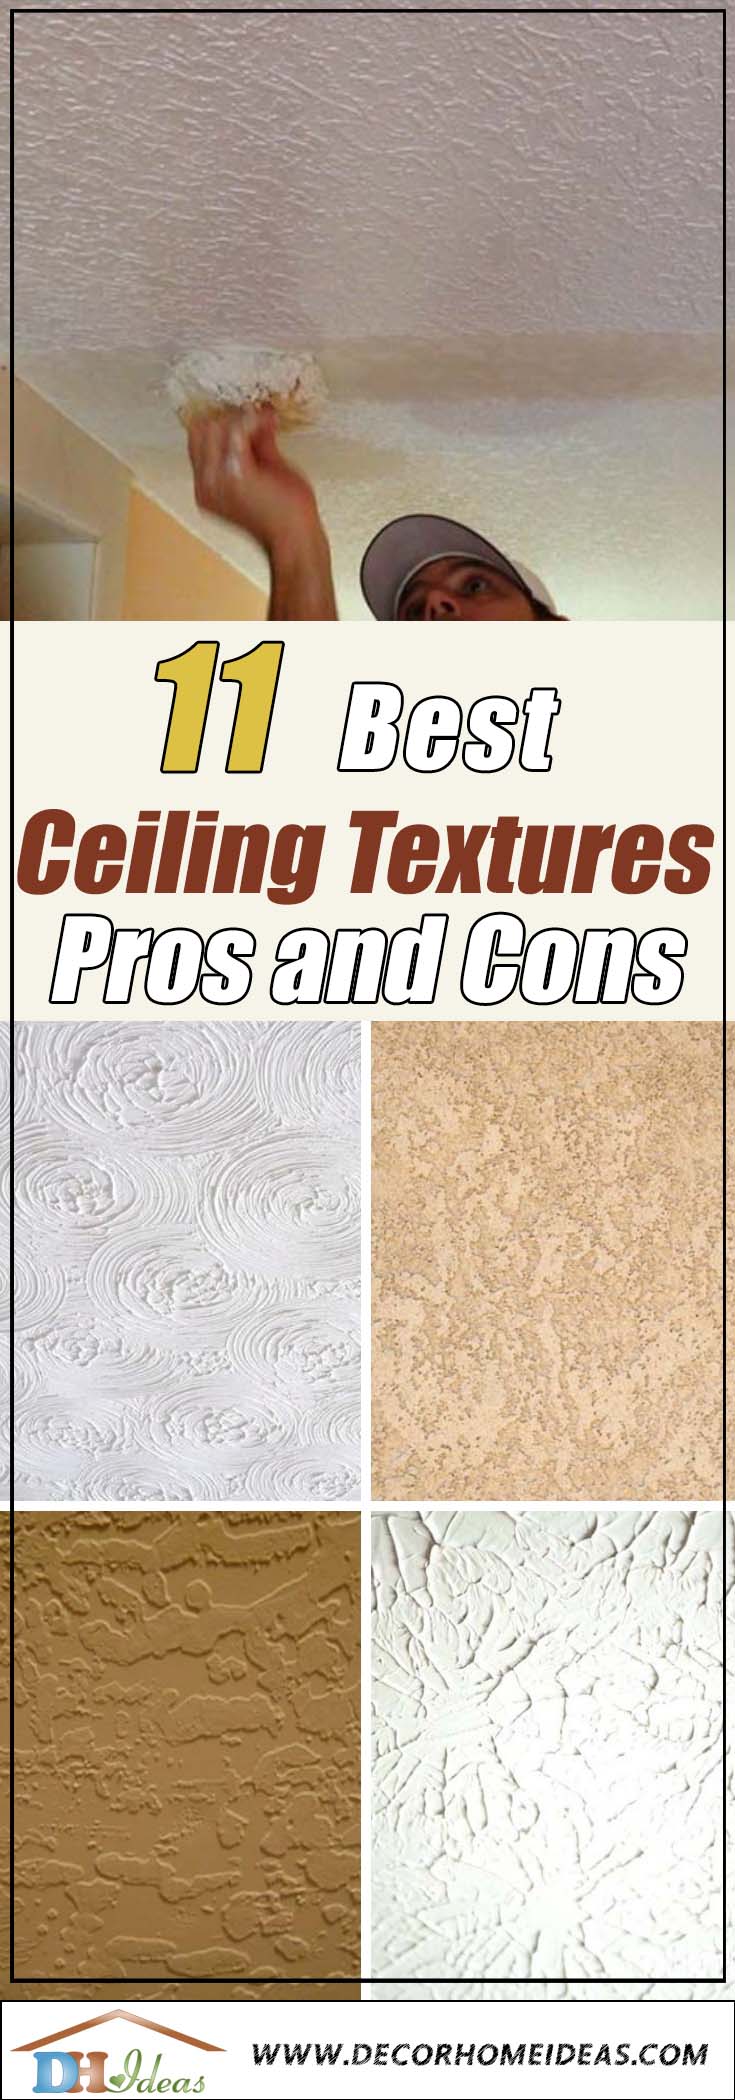 11 Best Ceiling Texture Types For 2021, What Ceiling Texture Is Best